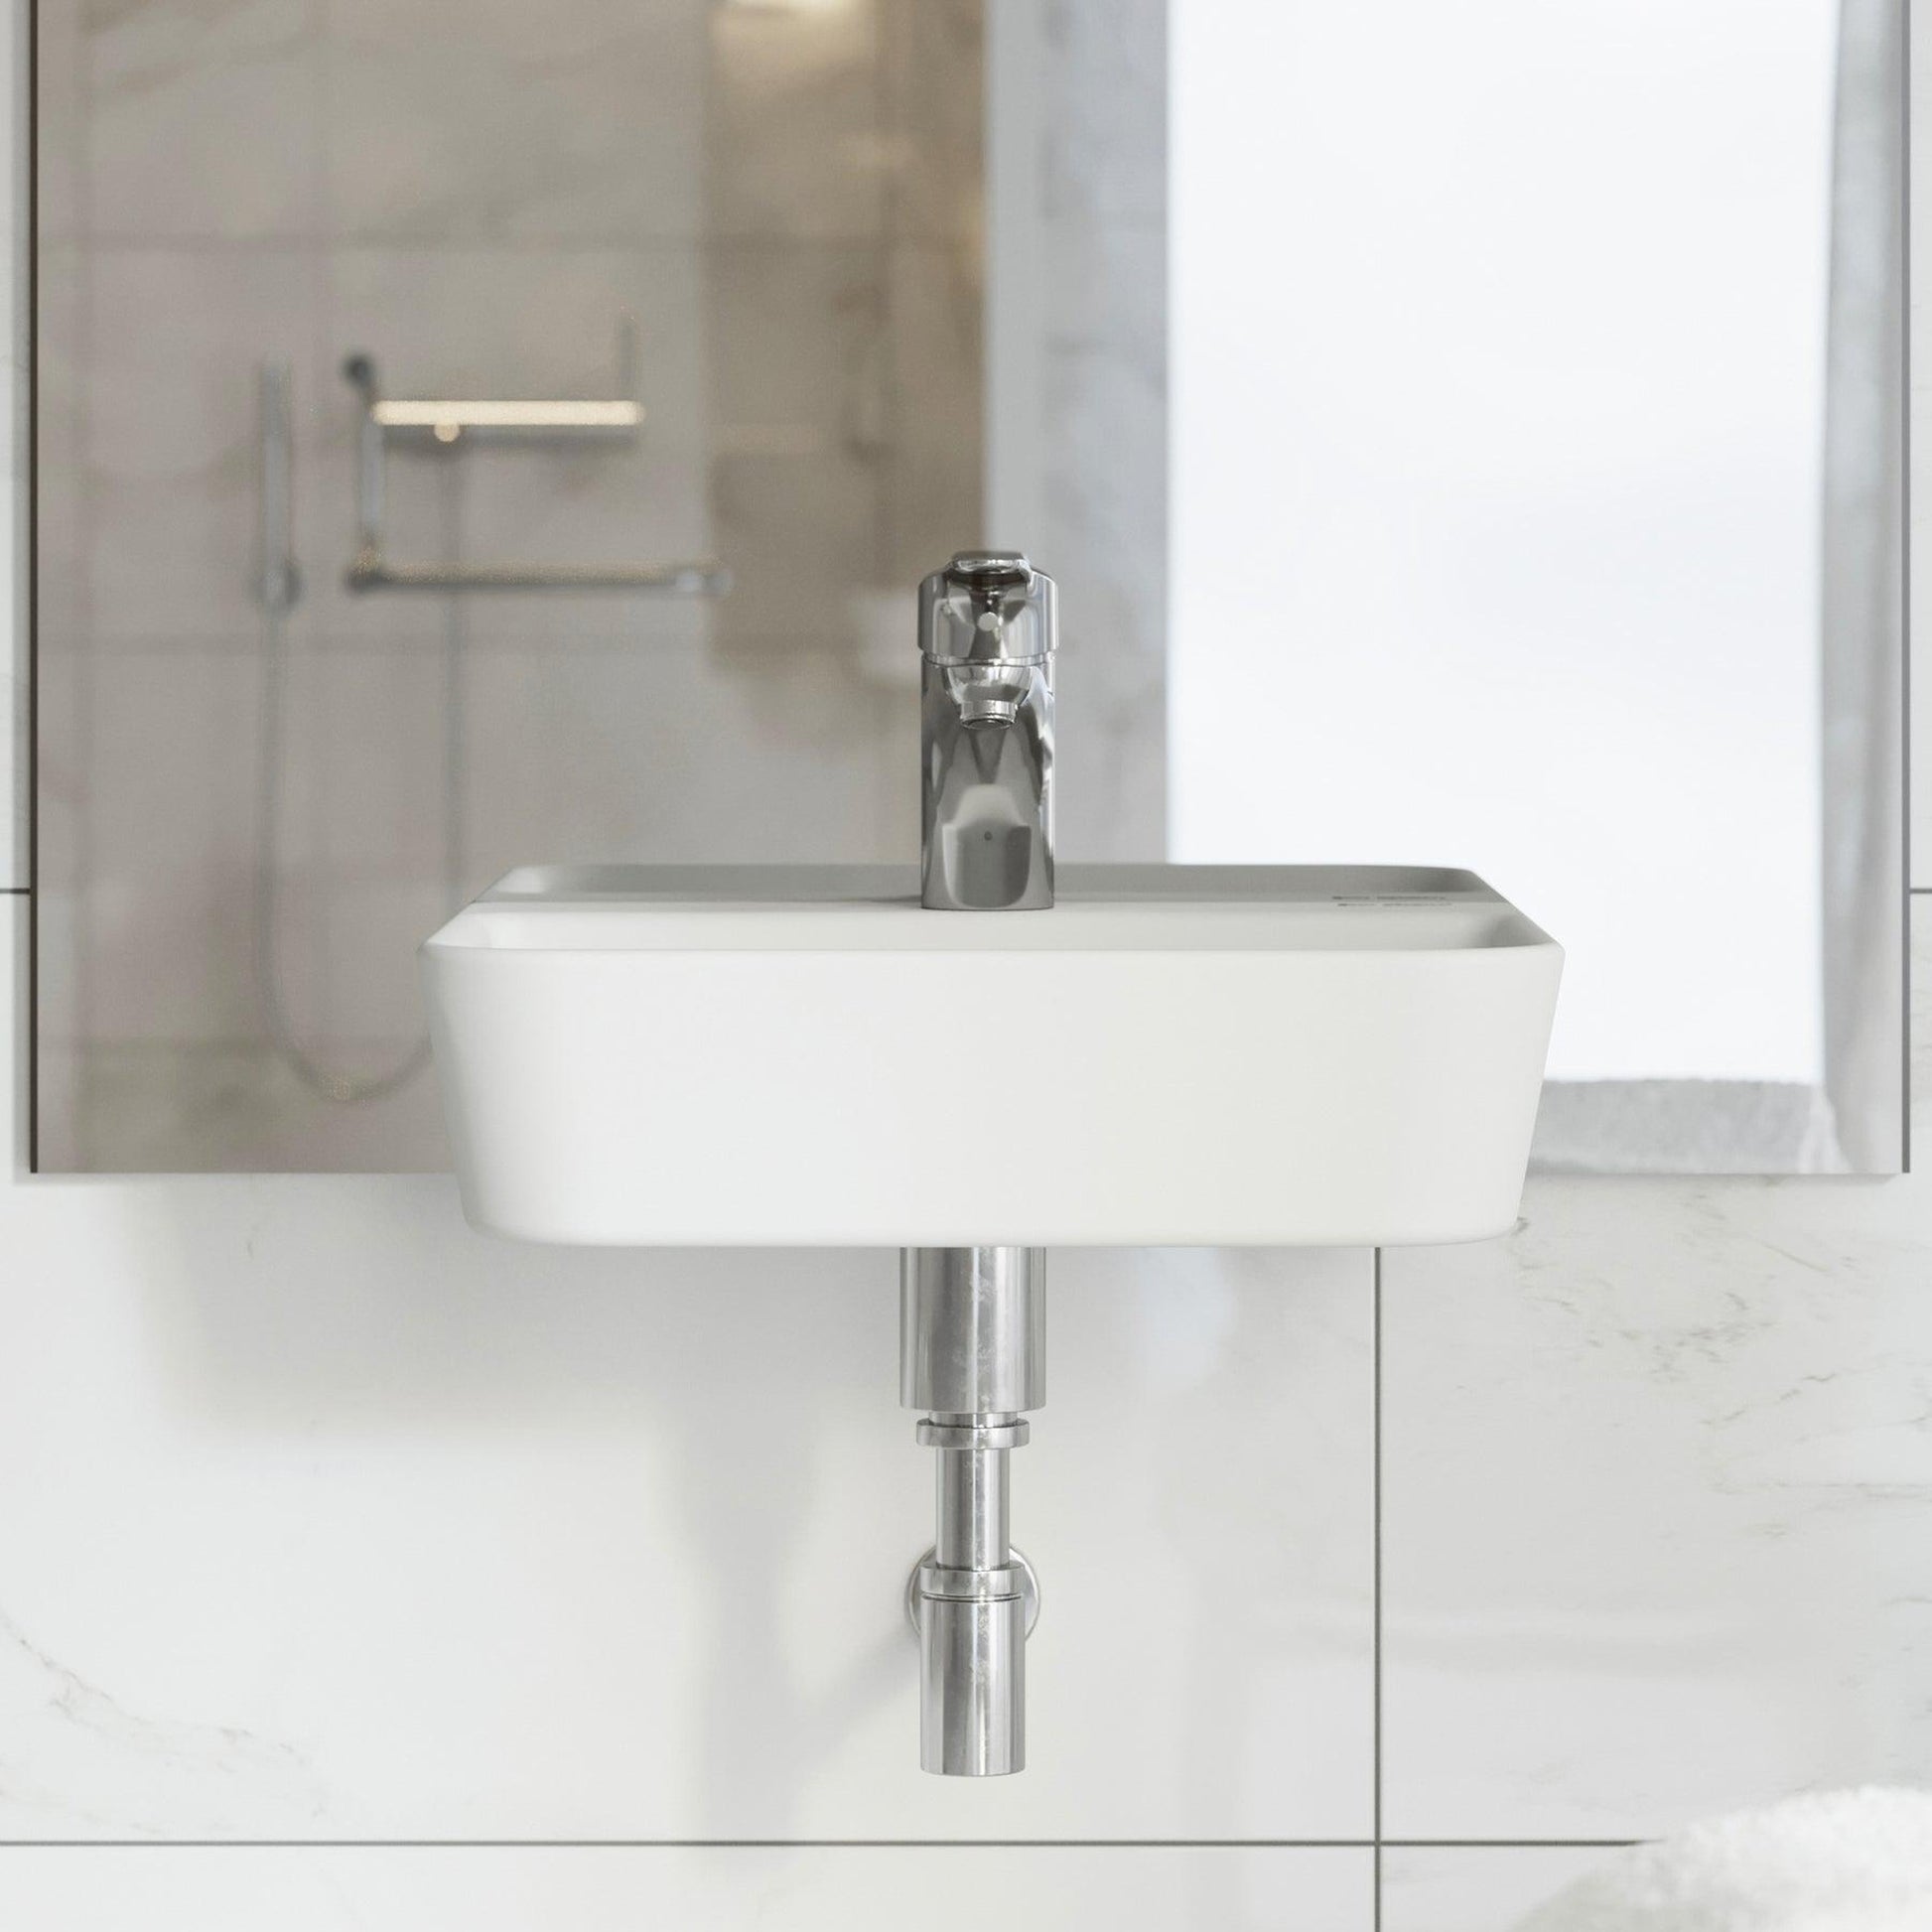 Swiss Madison St. Tropez 18" x 13" Rectangular White Ceramic Wall-Hung Bathroom Sink With Single Hole Faucet